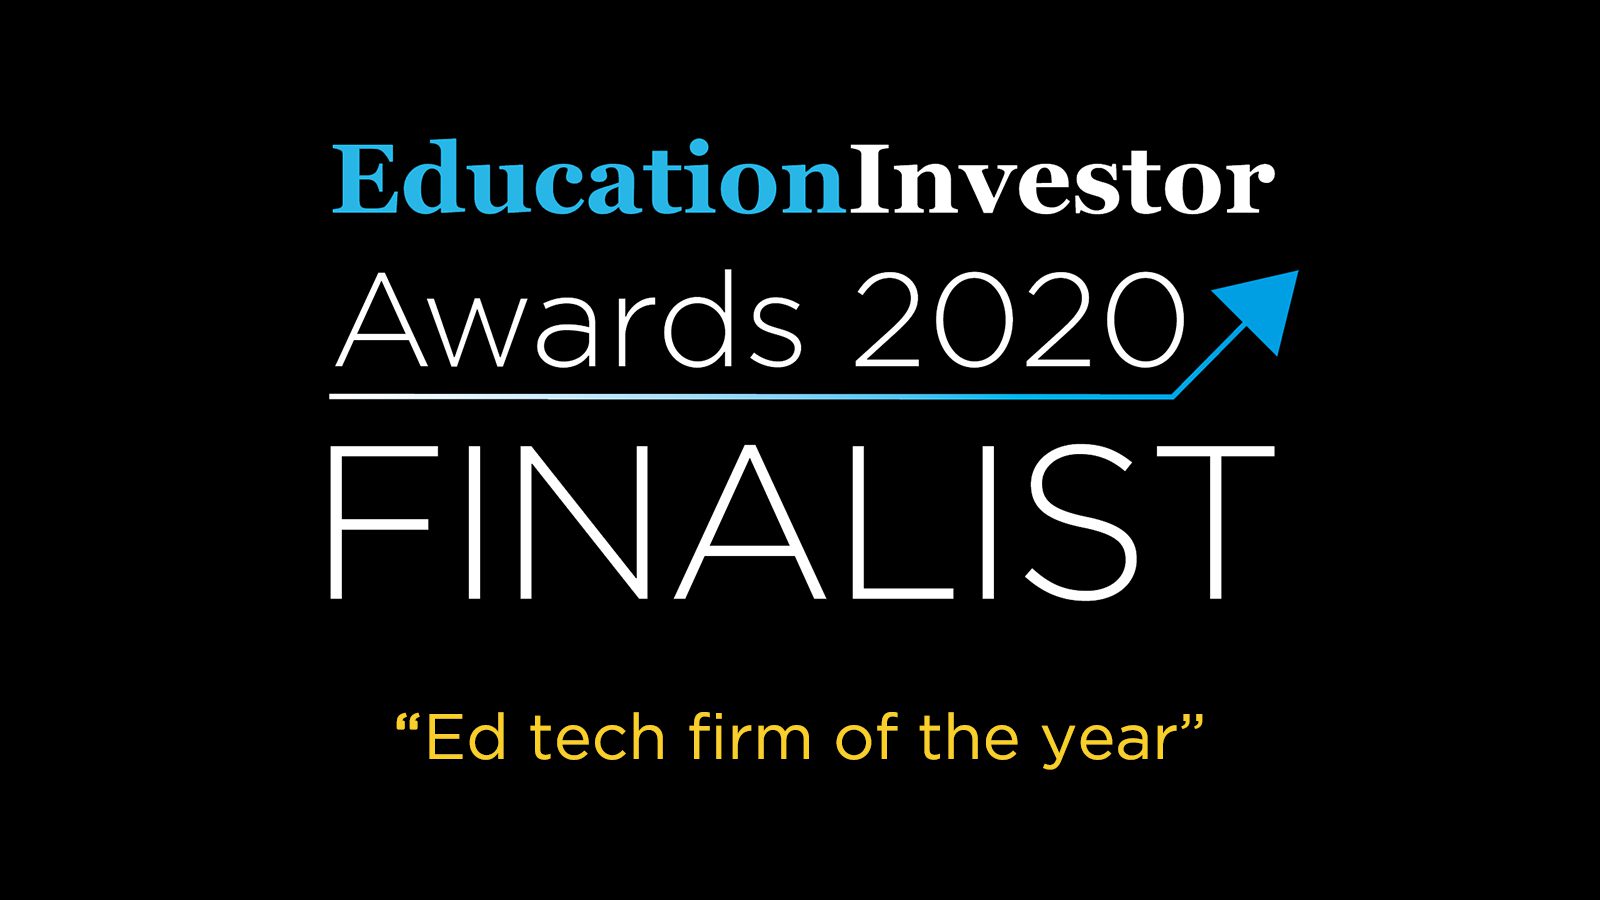 Education Investor Awards 2020 Discovery Education announced as Grand